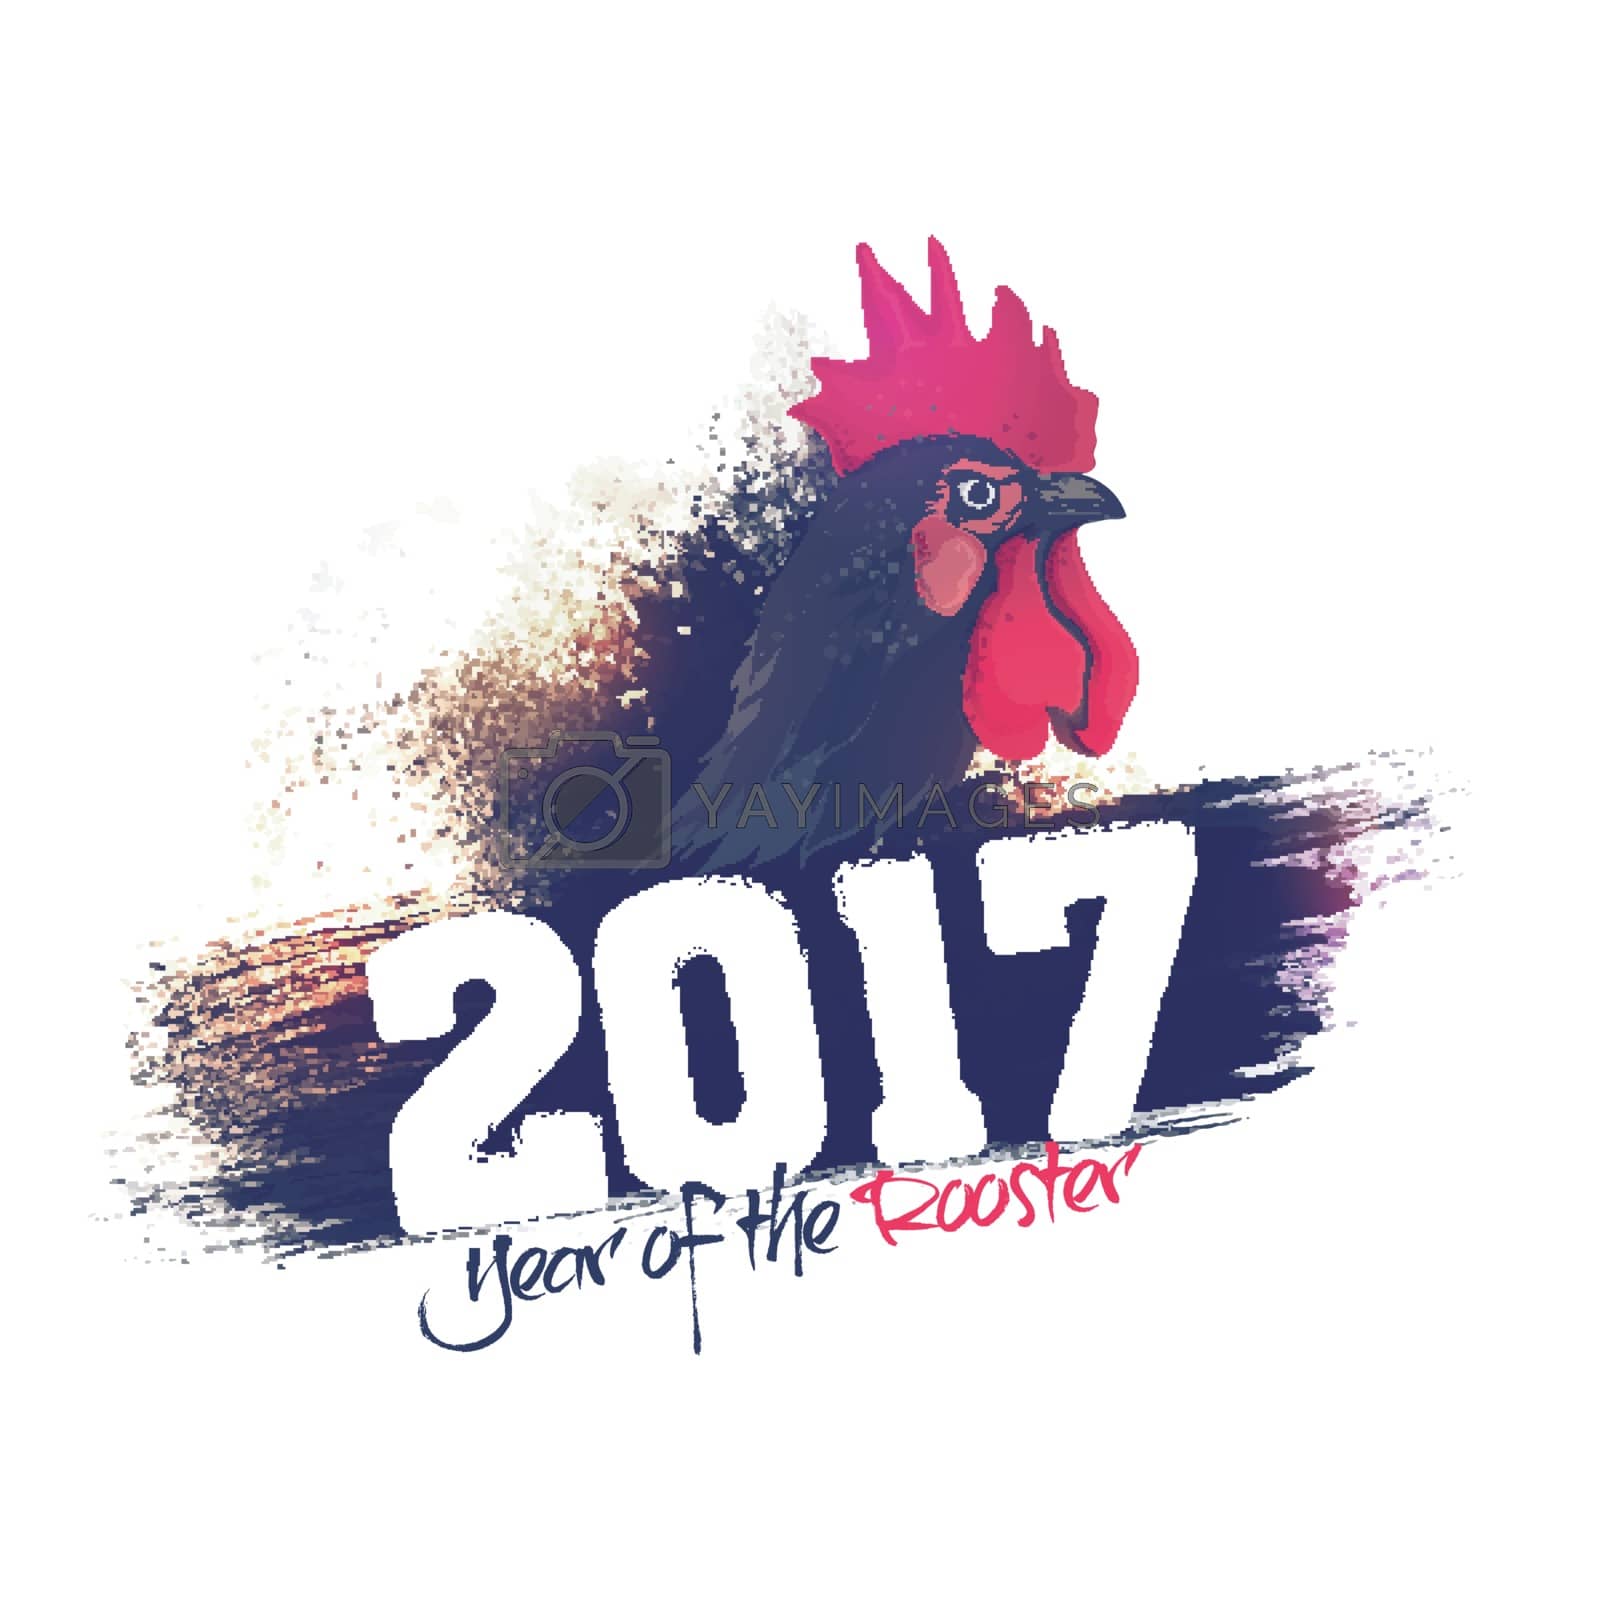 Royalty free image of Rooster for Chinese New Year. by aispl